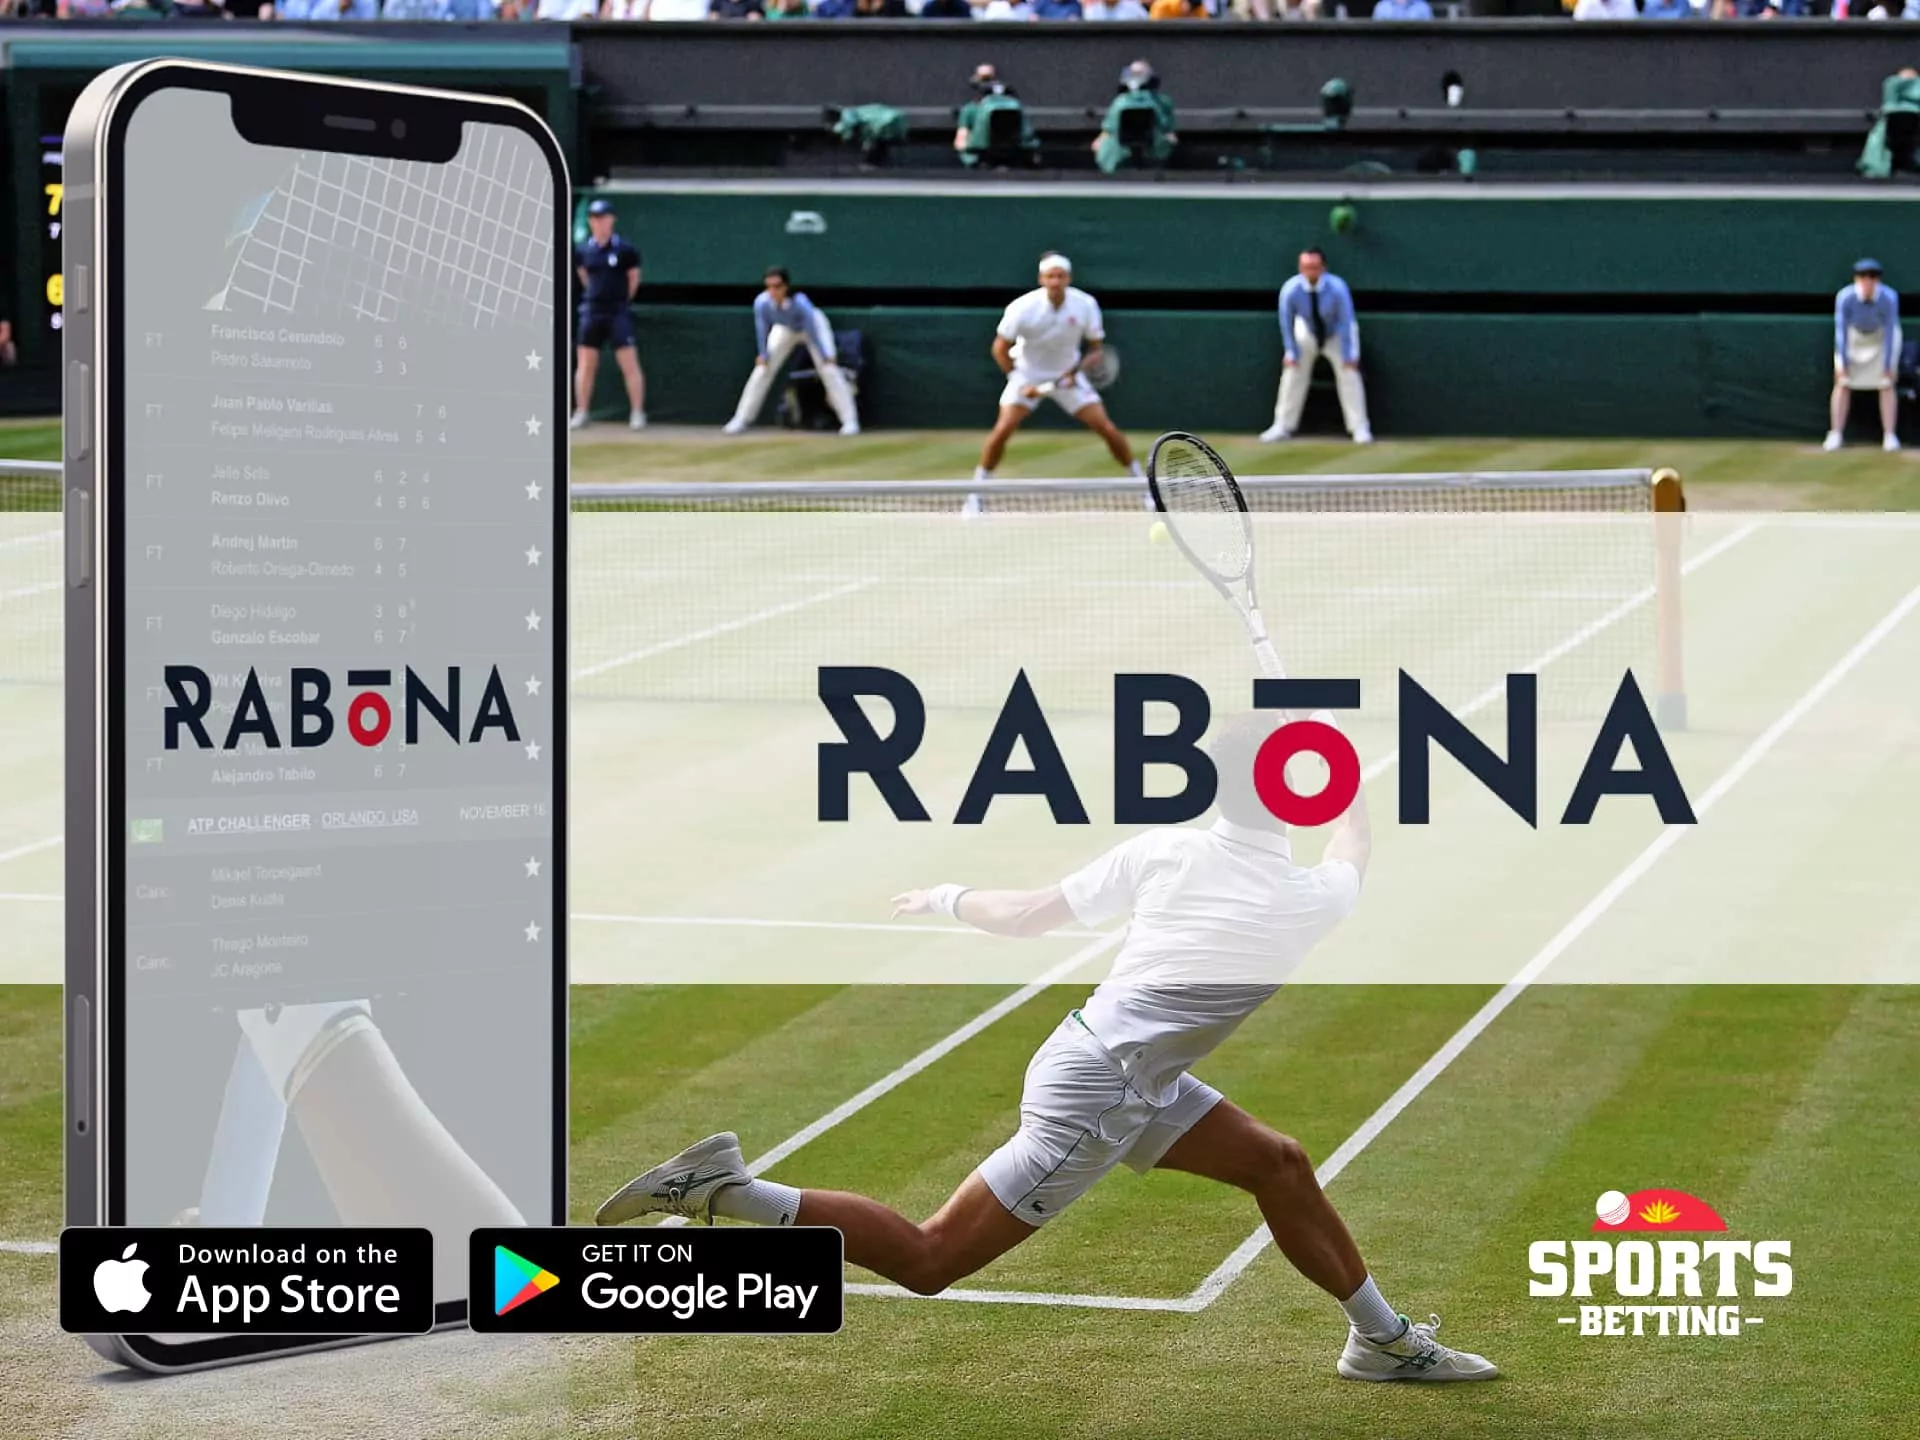 Rabona tennis betting site with fast registration.